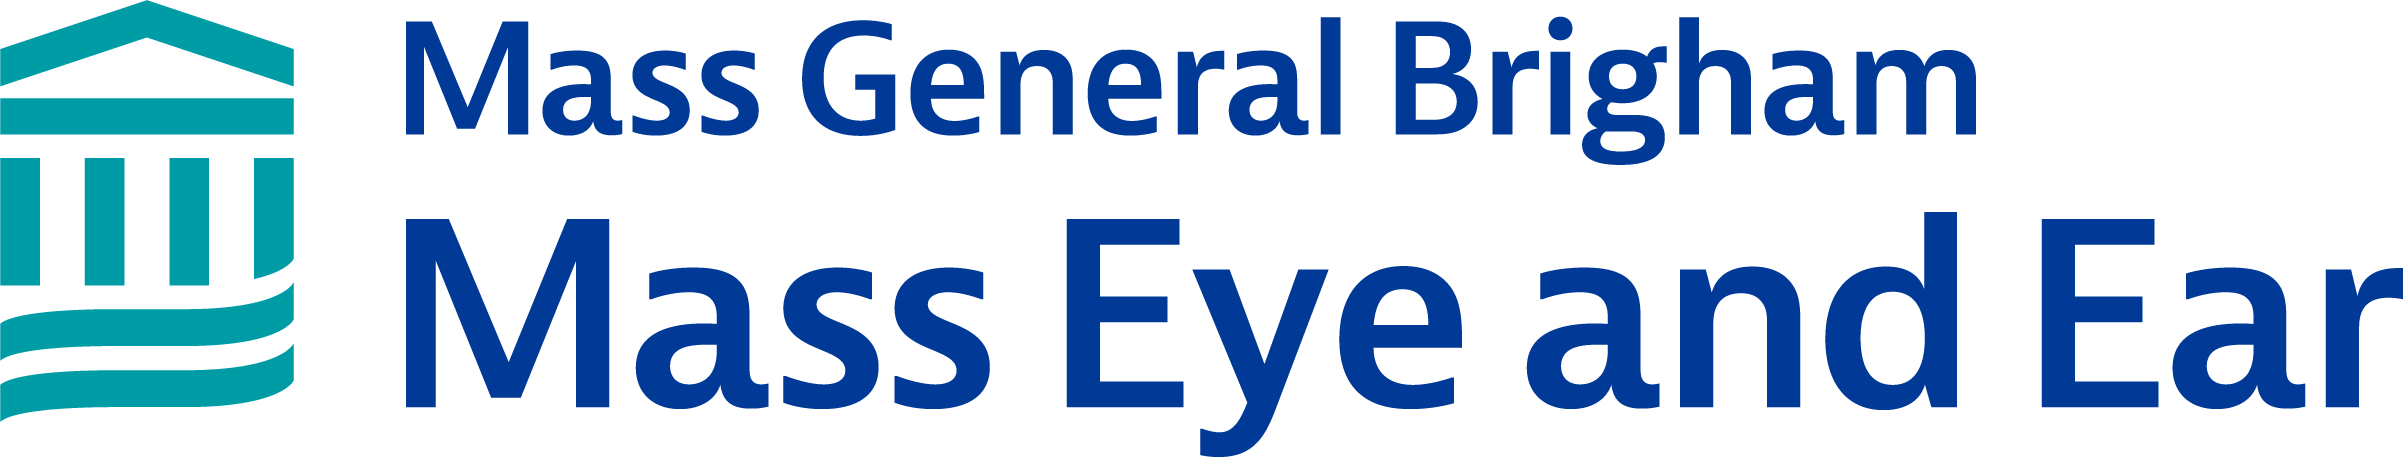 institutions-New Mass Eye and Ear logo20221129103898.png